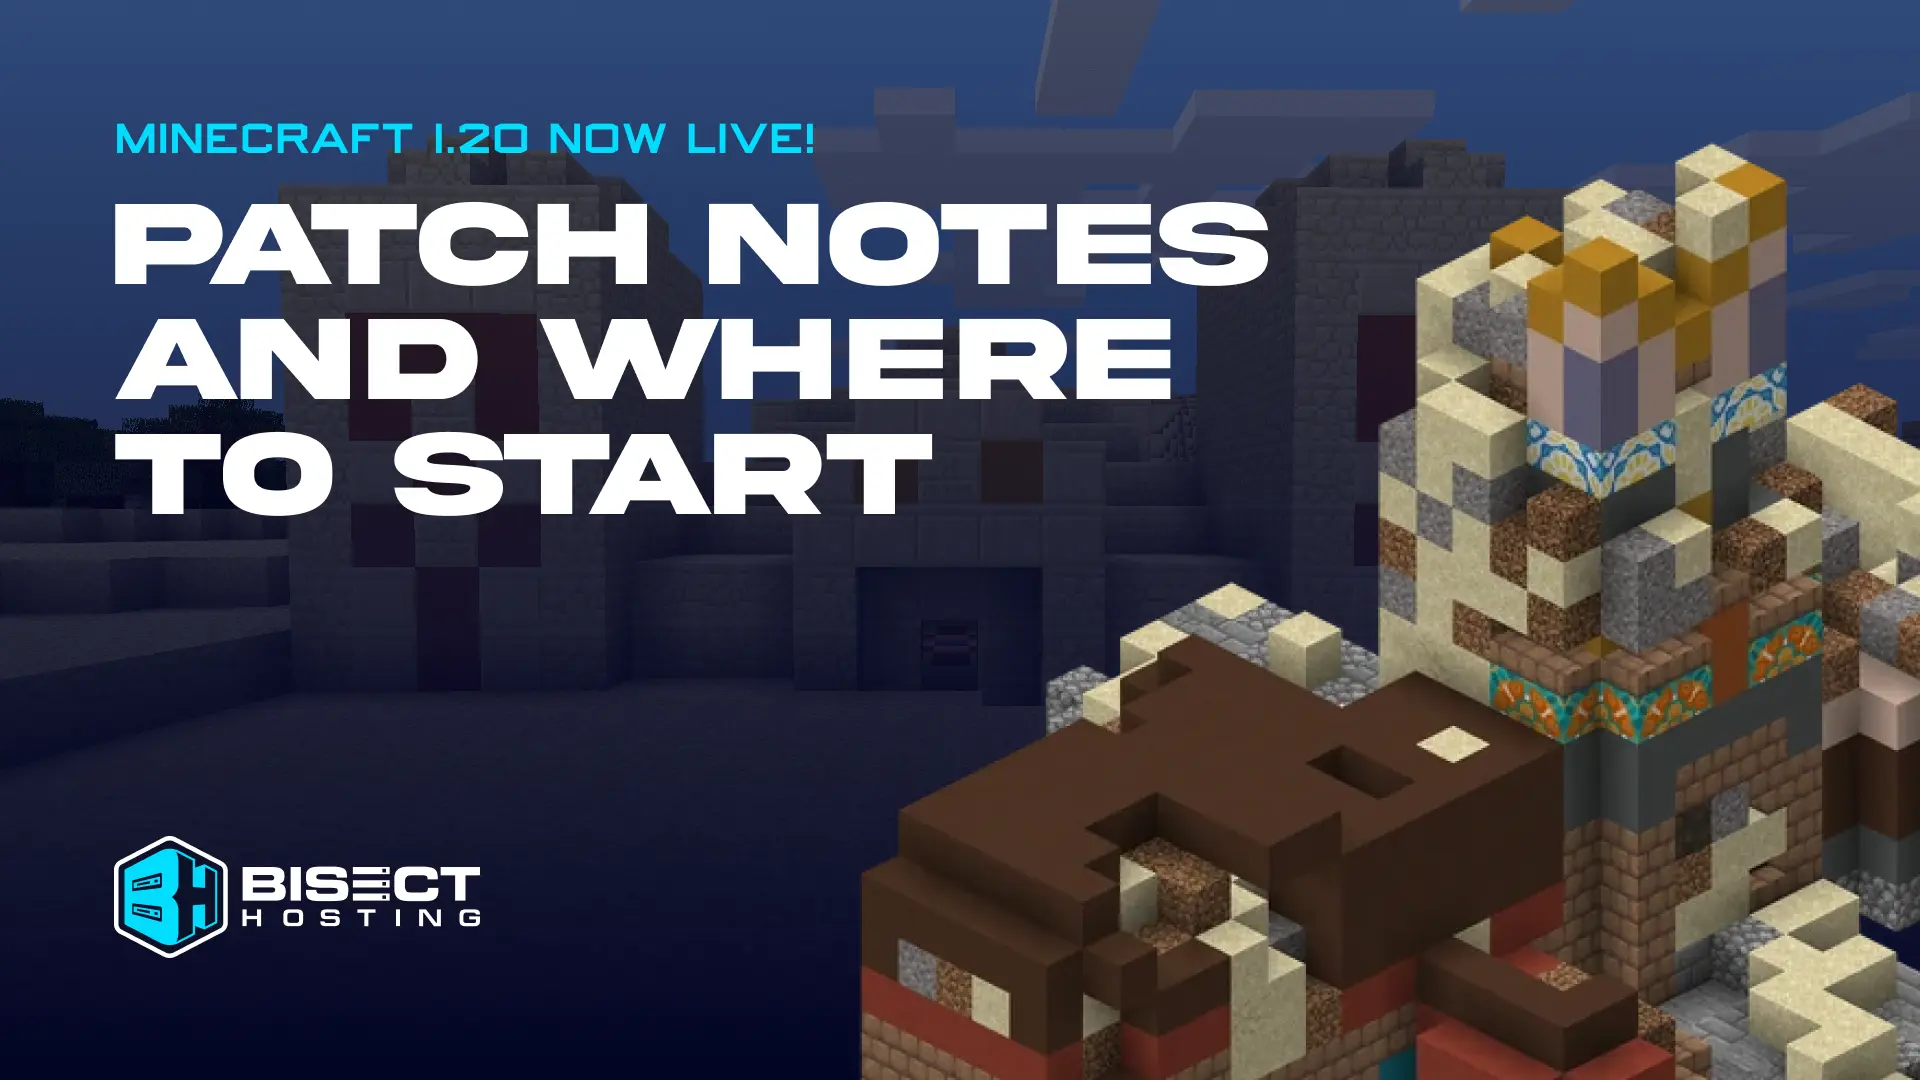 Minecraft Trails &amp; Tales live NOW: Patch Notes &amp; Where to Start